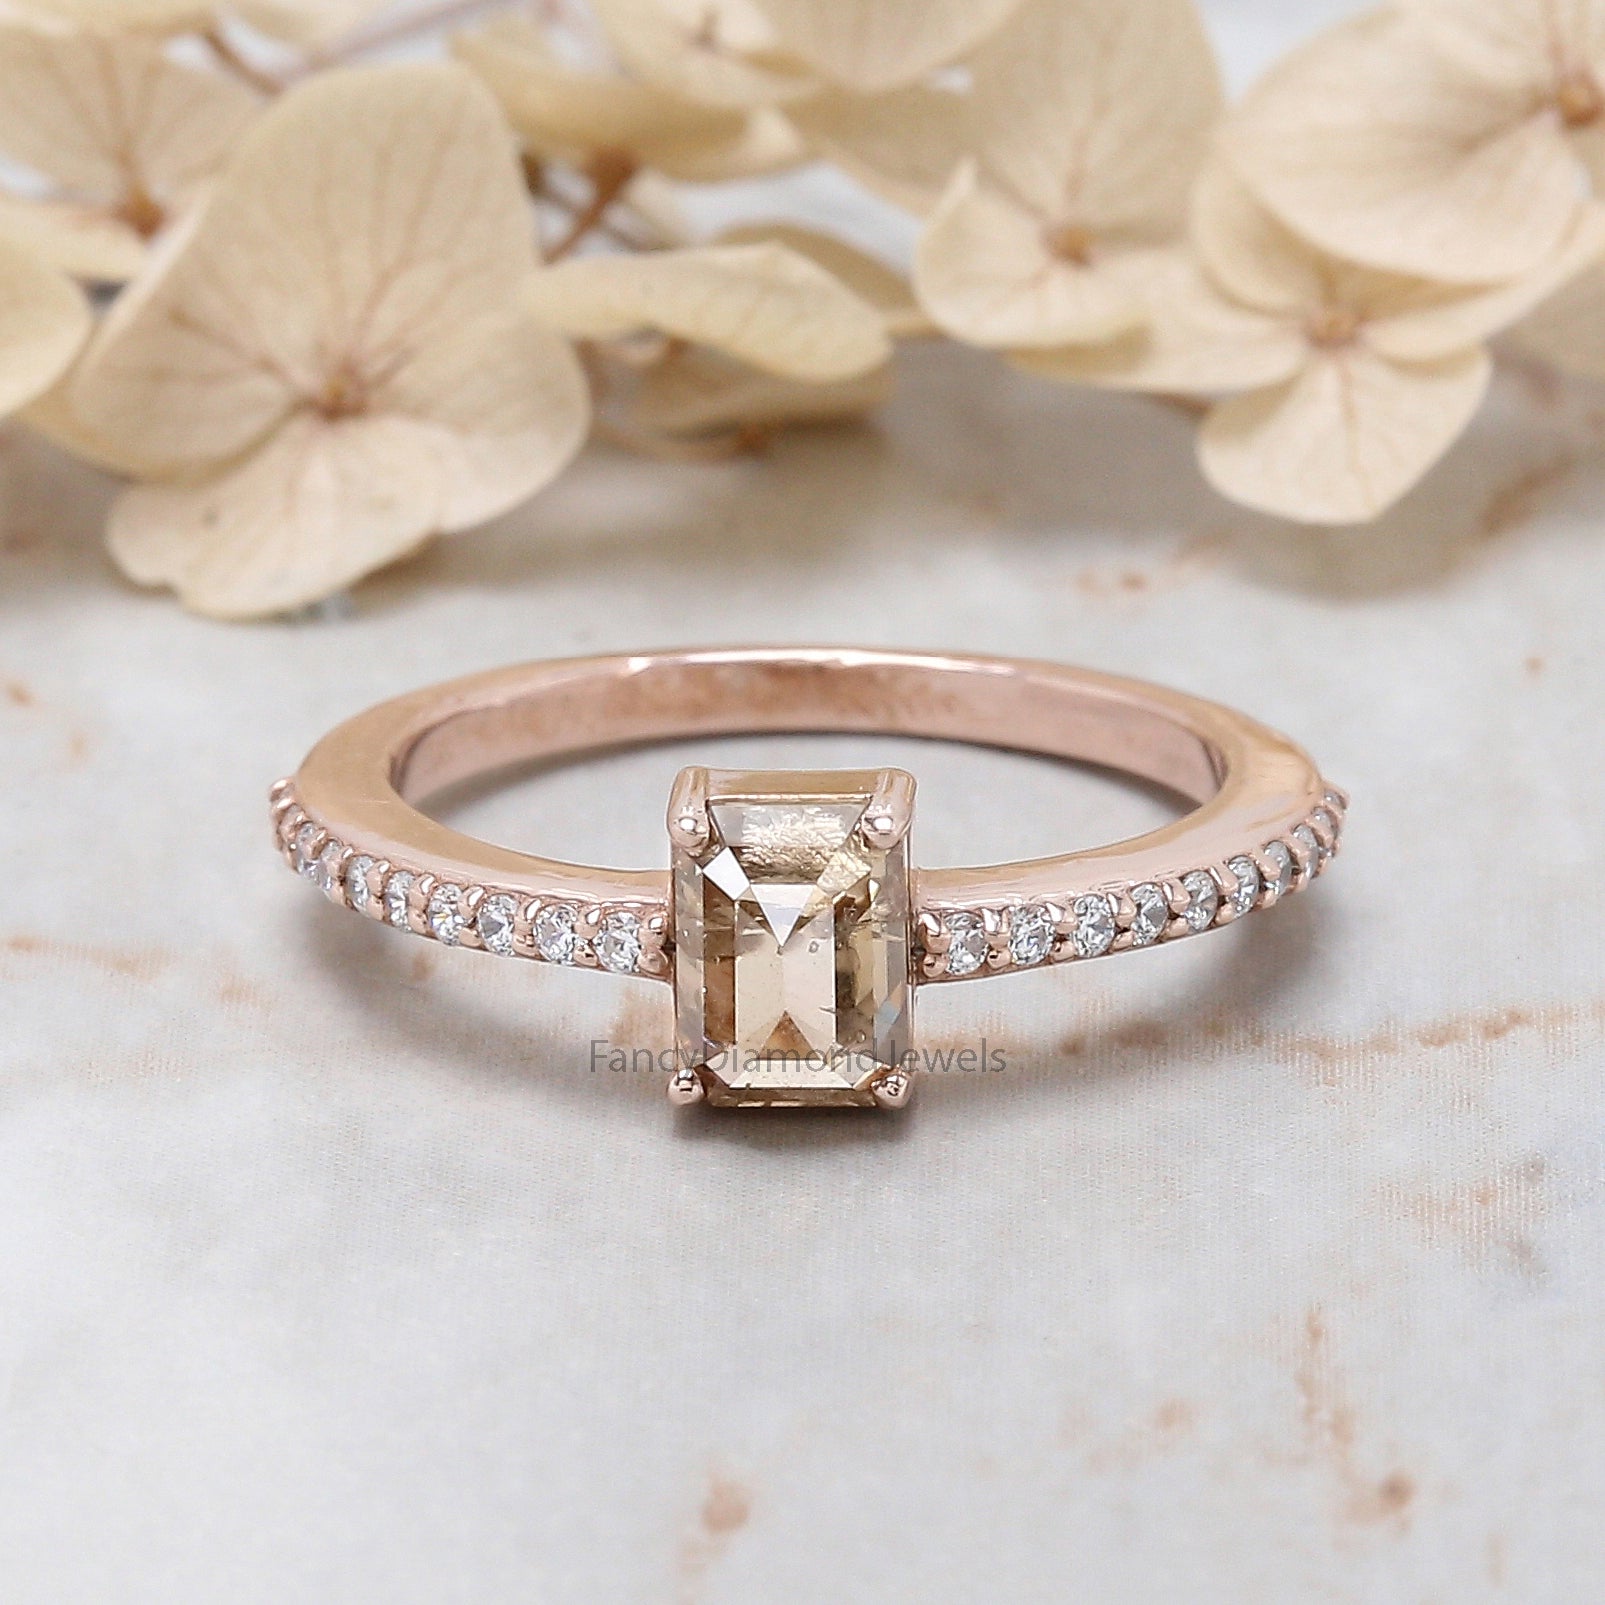 Emerald Cut Brown Color Diamond Ring 0.87 Ct 6.05 MM Emerald Shape Diamond Ring 14K Rose Gold Silver Engagement Ring Gift For Her QL060